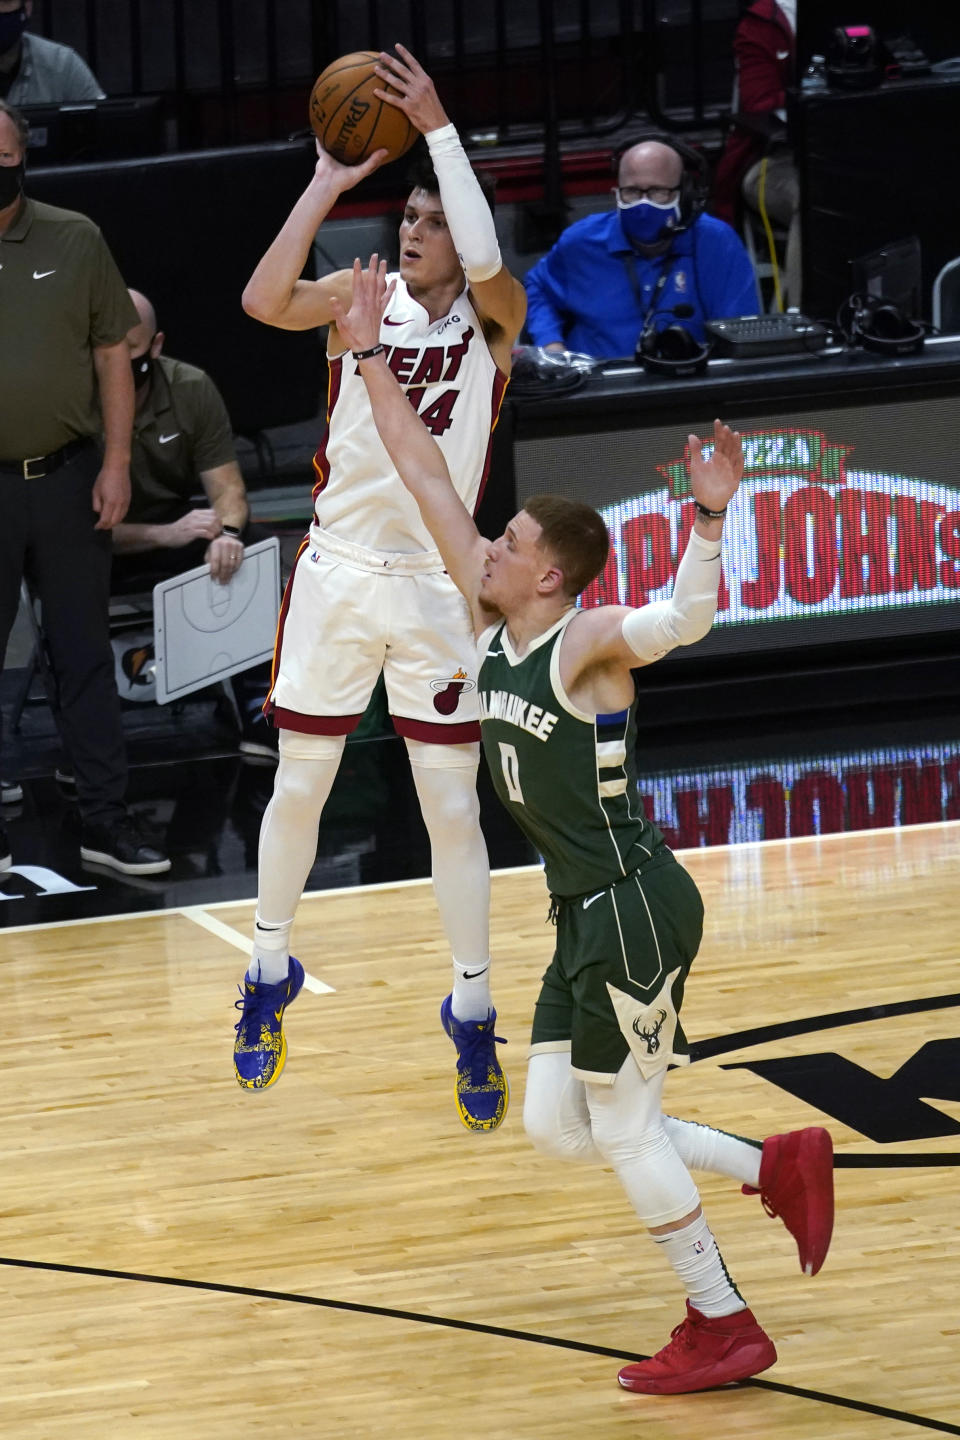 Miami Heat guard Tyler Herro (14) attempts a 3-point basket as Milwaukee Bucks guard Donte DiVincenzo (0) defends during the first half of an NBA basketball game Wednesday, Dec. 30, 2020, in Miami. (AP Photo/Lynne Sladky)